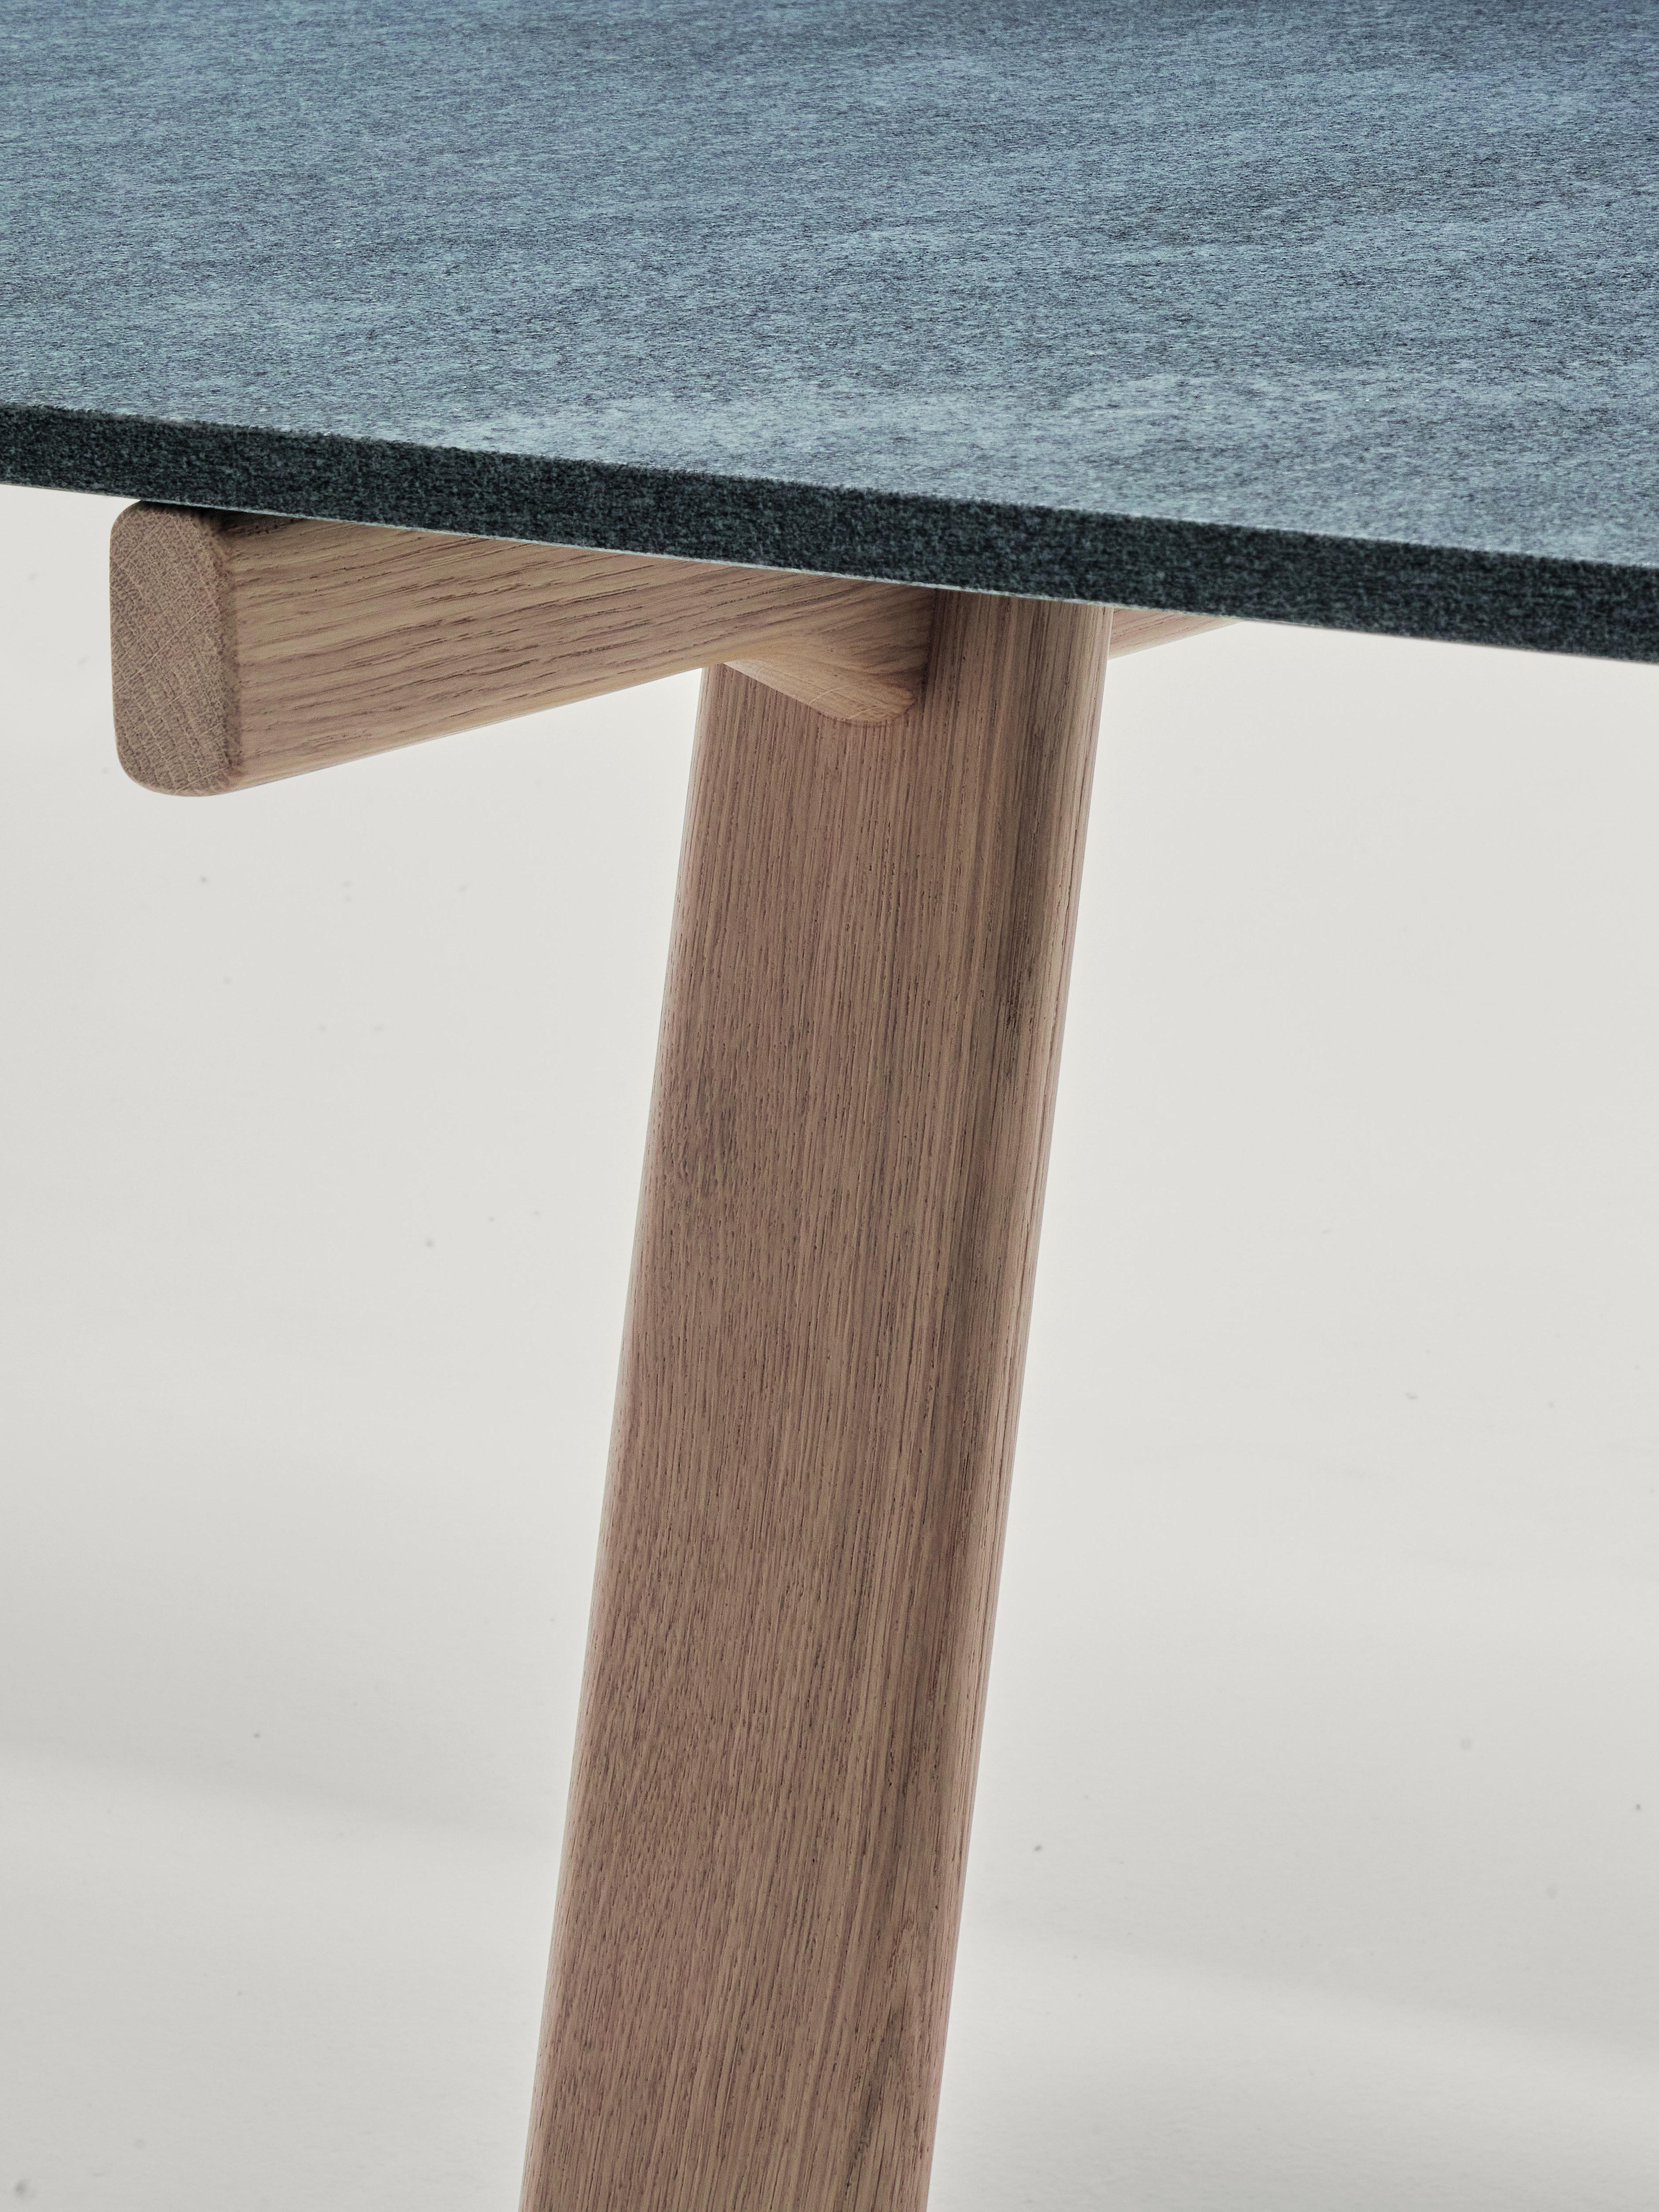 Zanotta Small Ambrosiano Table in Onsernone Stone Top with Natural Oak Frame by Mist-o

Trestles in solid natural oak or painted black with open pore. Matt black painted stainless steel spars. Top available either in 1/2” thick smoky grey tempered